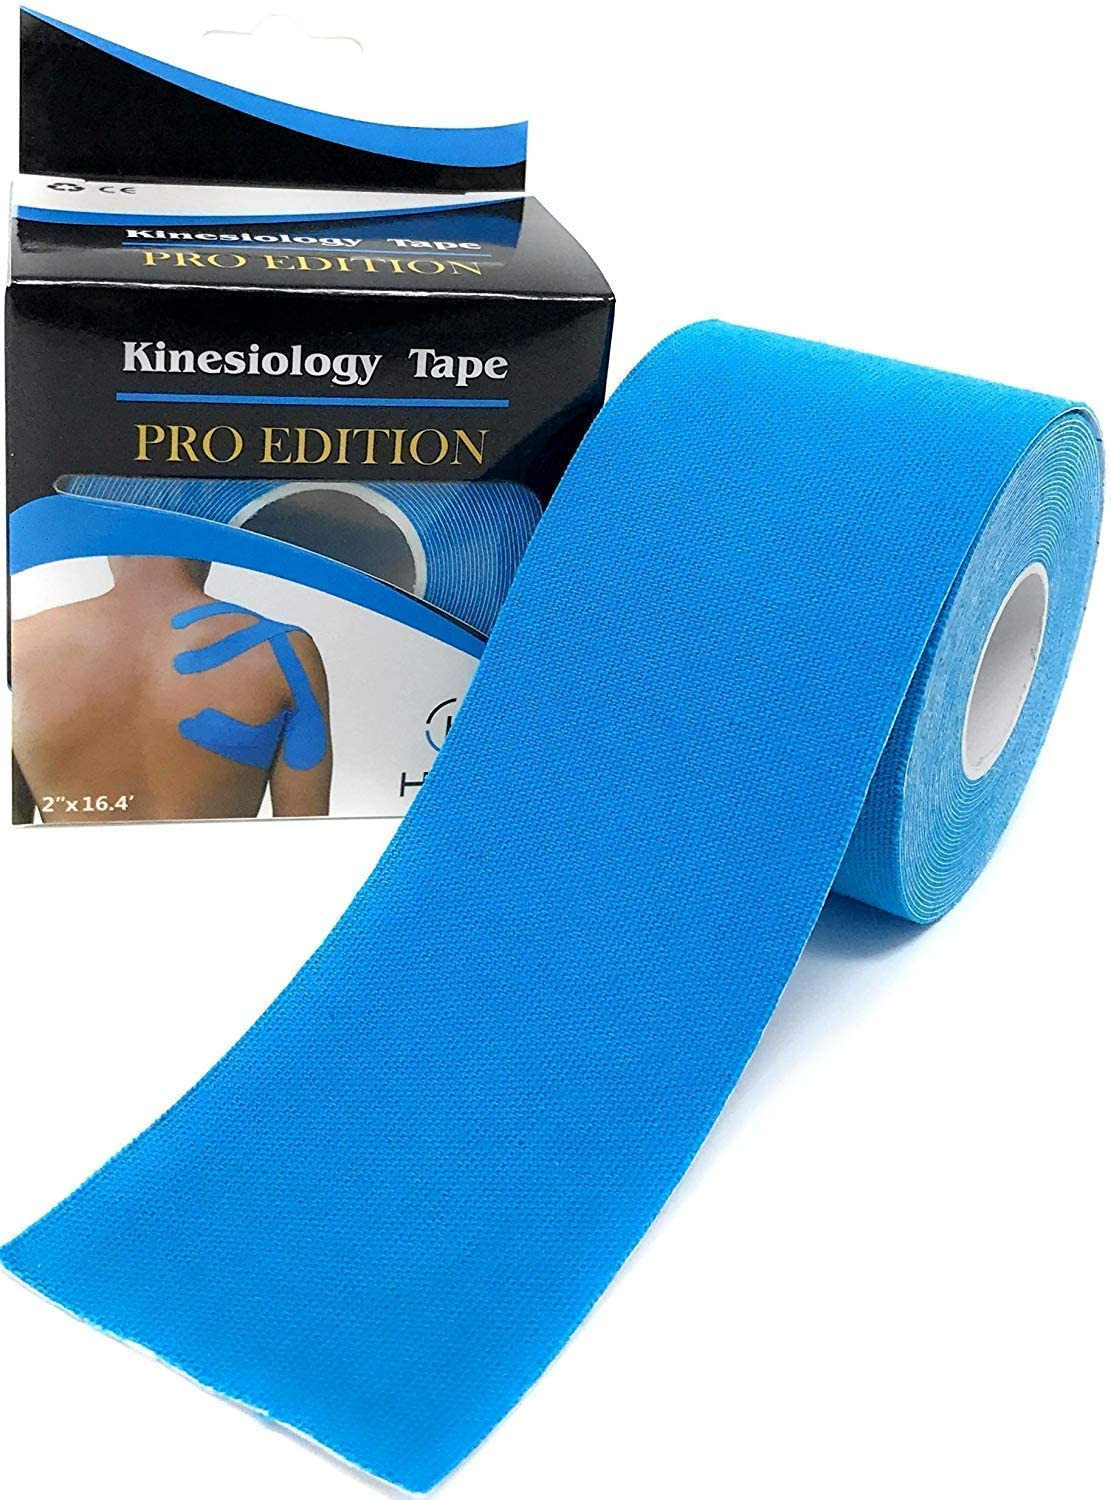 Waterproof Kinesiology Tape @ ₹ 249 Latex Free Breathable Athletic Sports Tape For Injury, Muscle Support, Pain Relief, Joint Support And Physiotherapy (5 m X 5 cm)